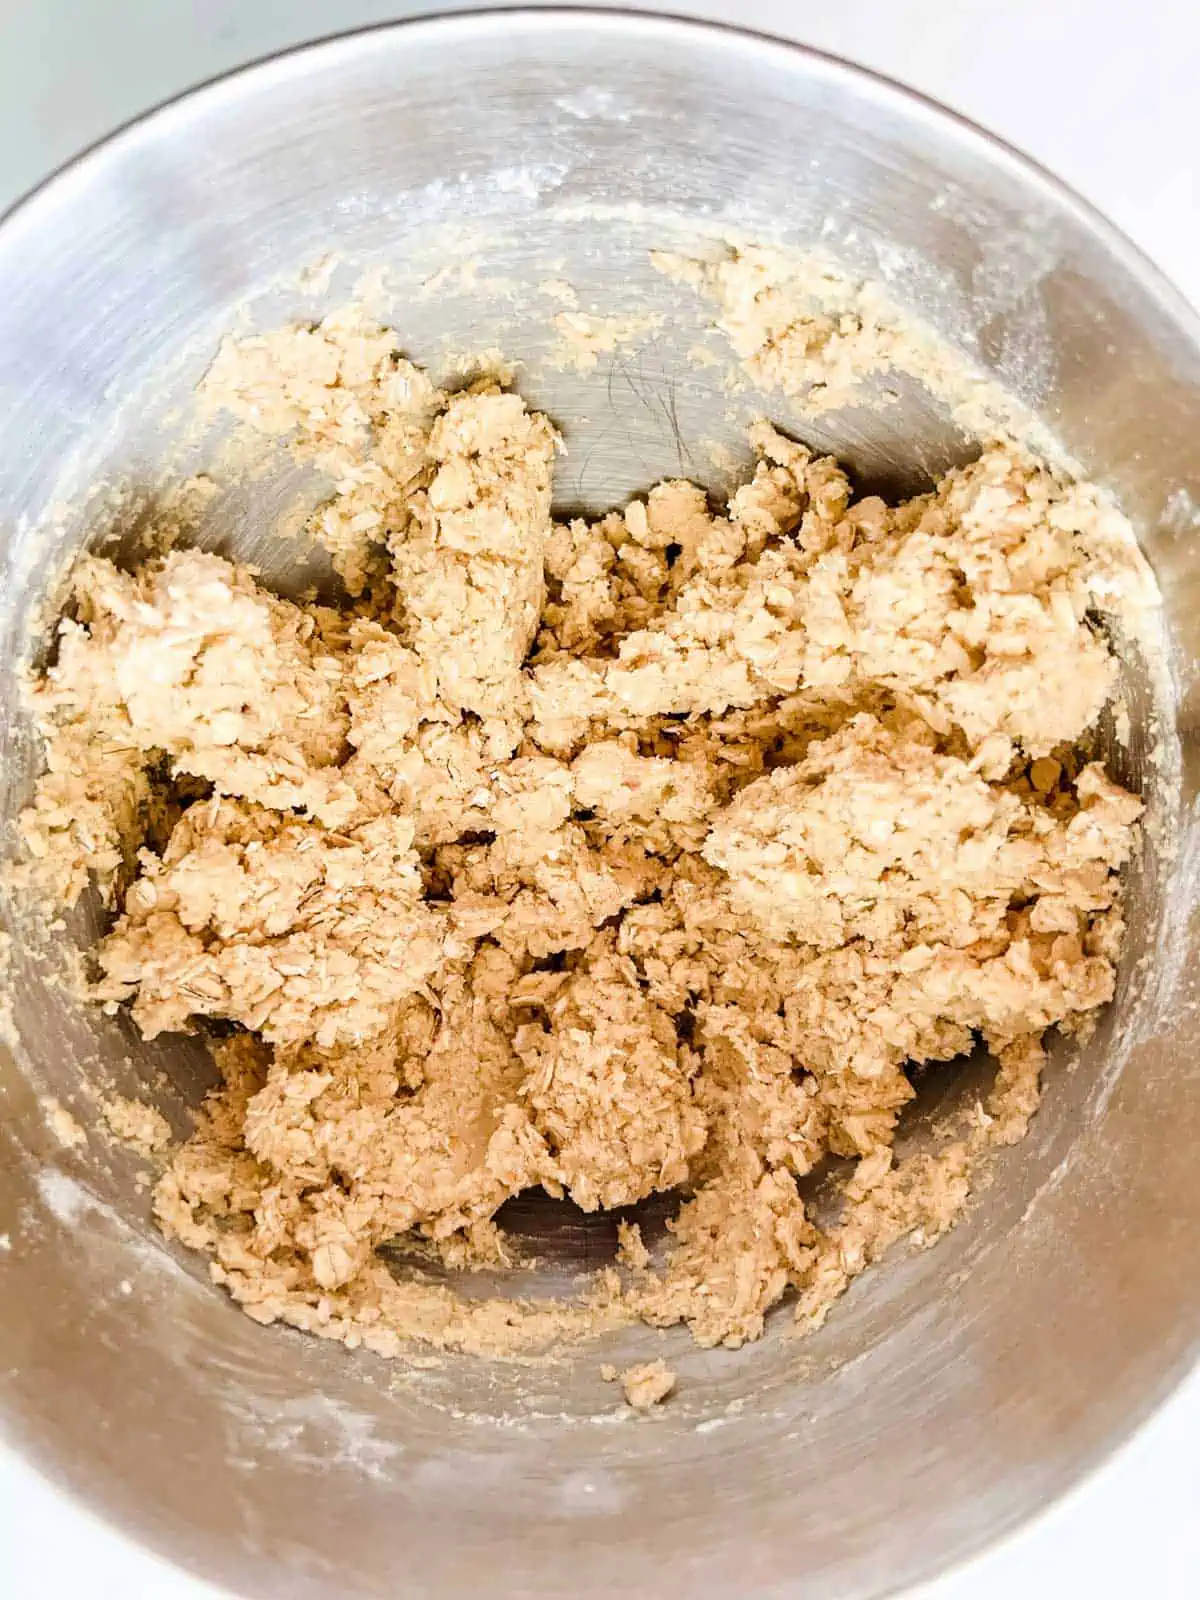 Photo of cookie dough in the bowl of a stand mixer.